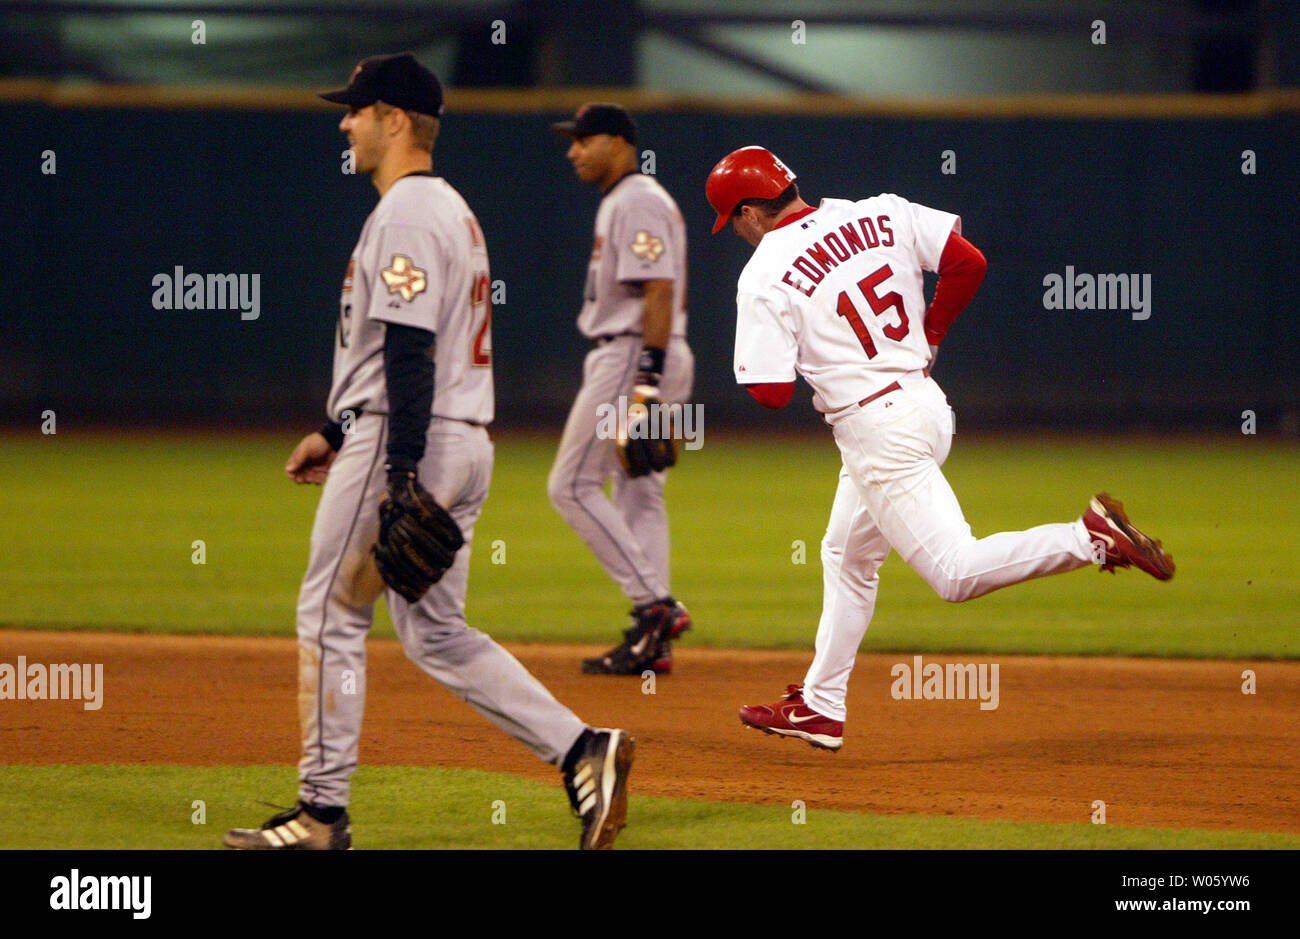 On this day in 2004, Jim Edmonds hit a walkoff home run - A Hunt